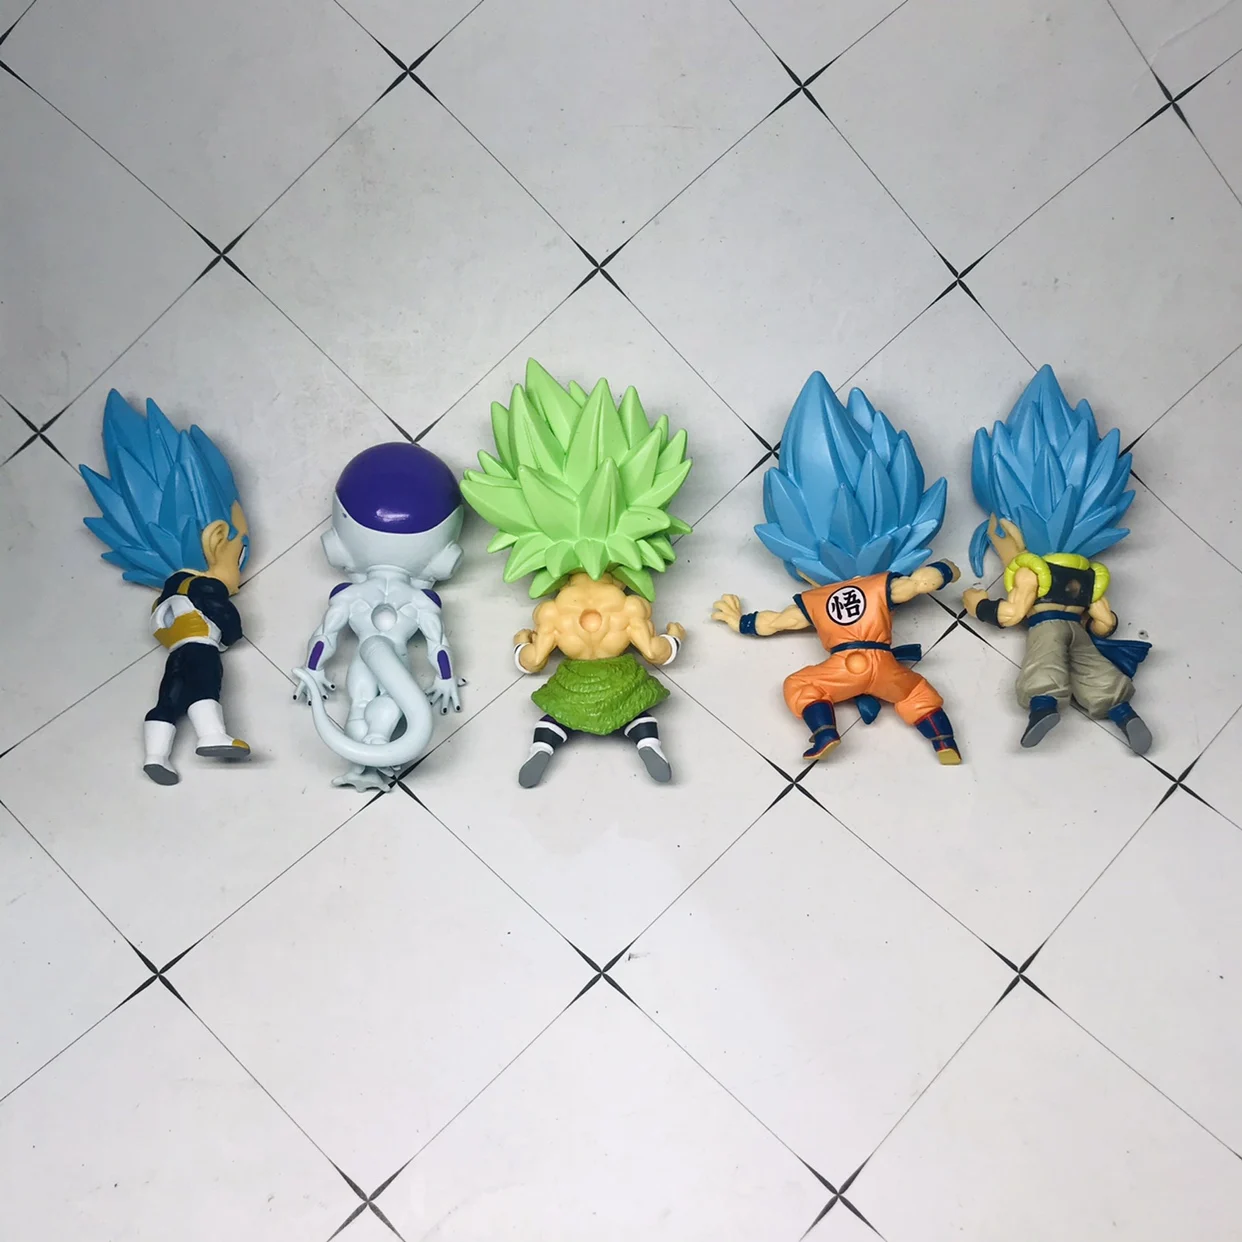 DRAGON BALL SUPER SERIES 1 KEYCHAIN BUILDABLE FIGURES COMPLETE SET OF 8 & RARE 